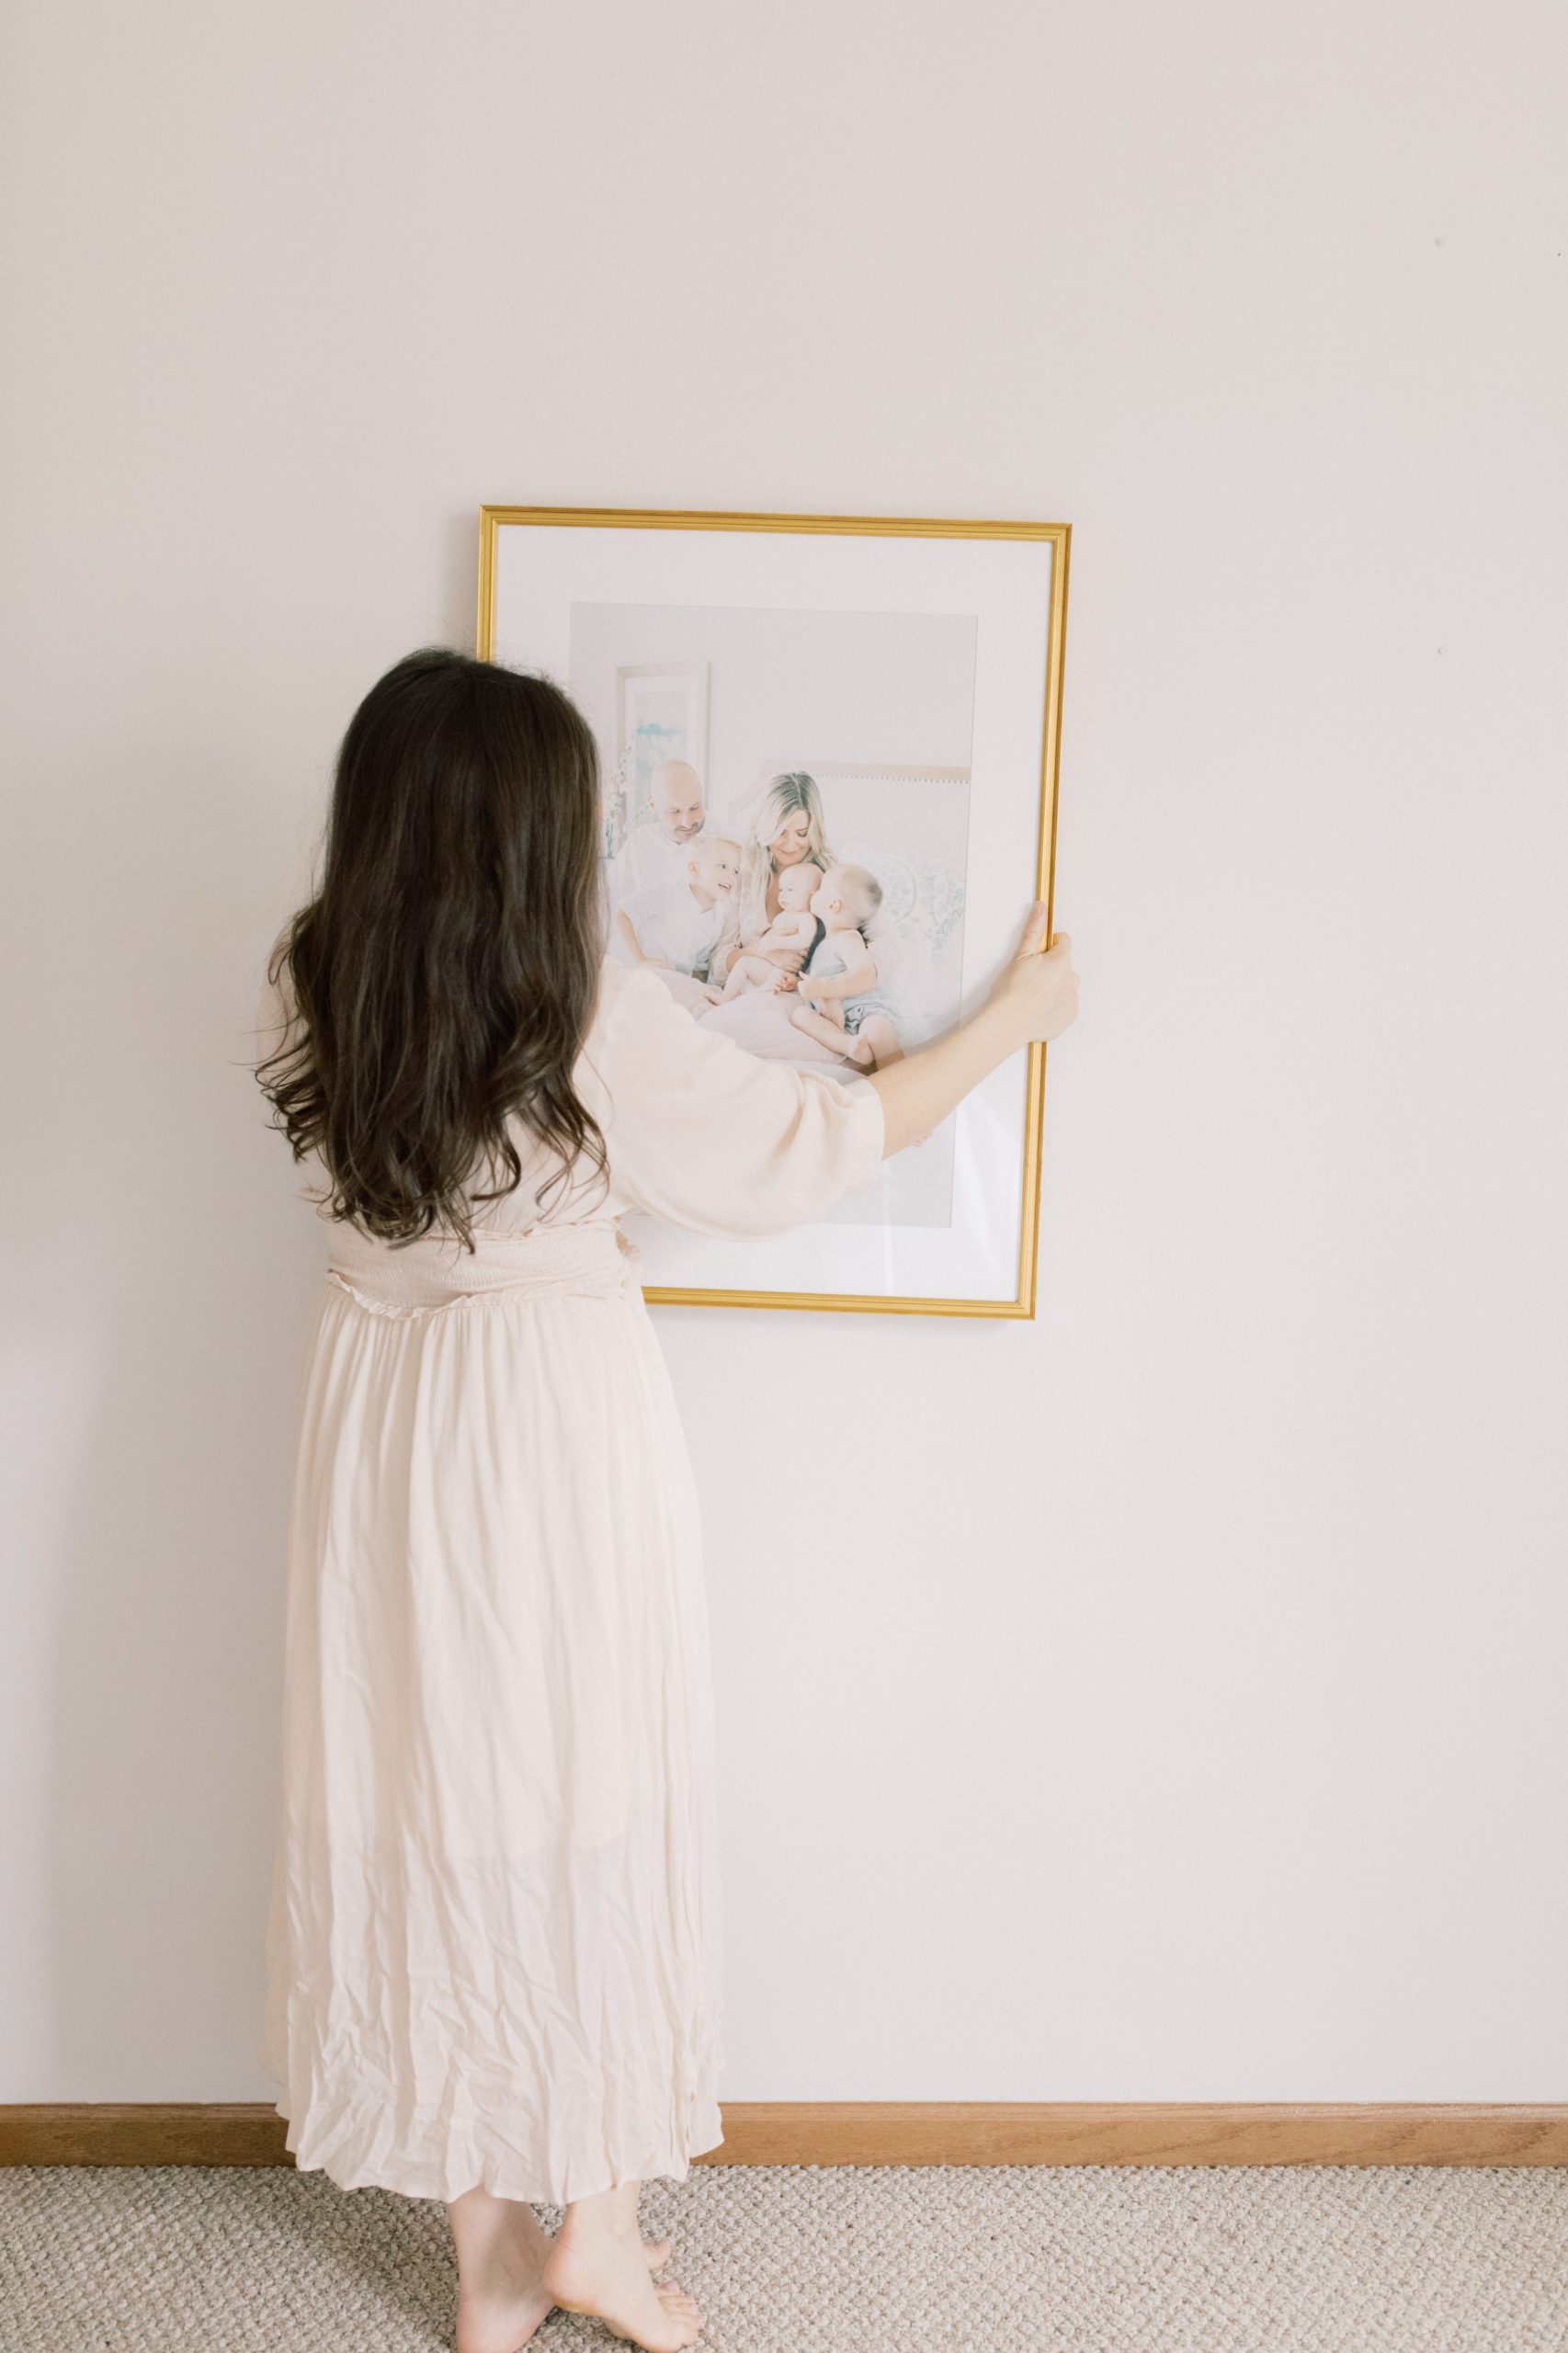 milwaukee family photographer talia laird holds a framed portrait from a family photo session